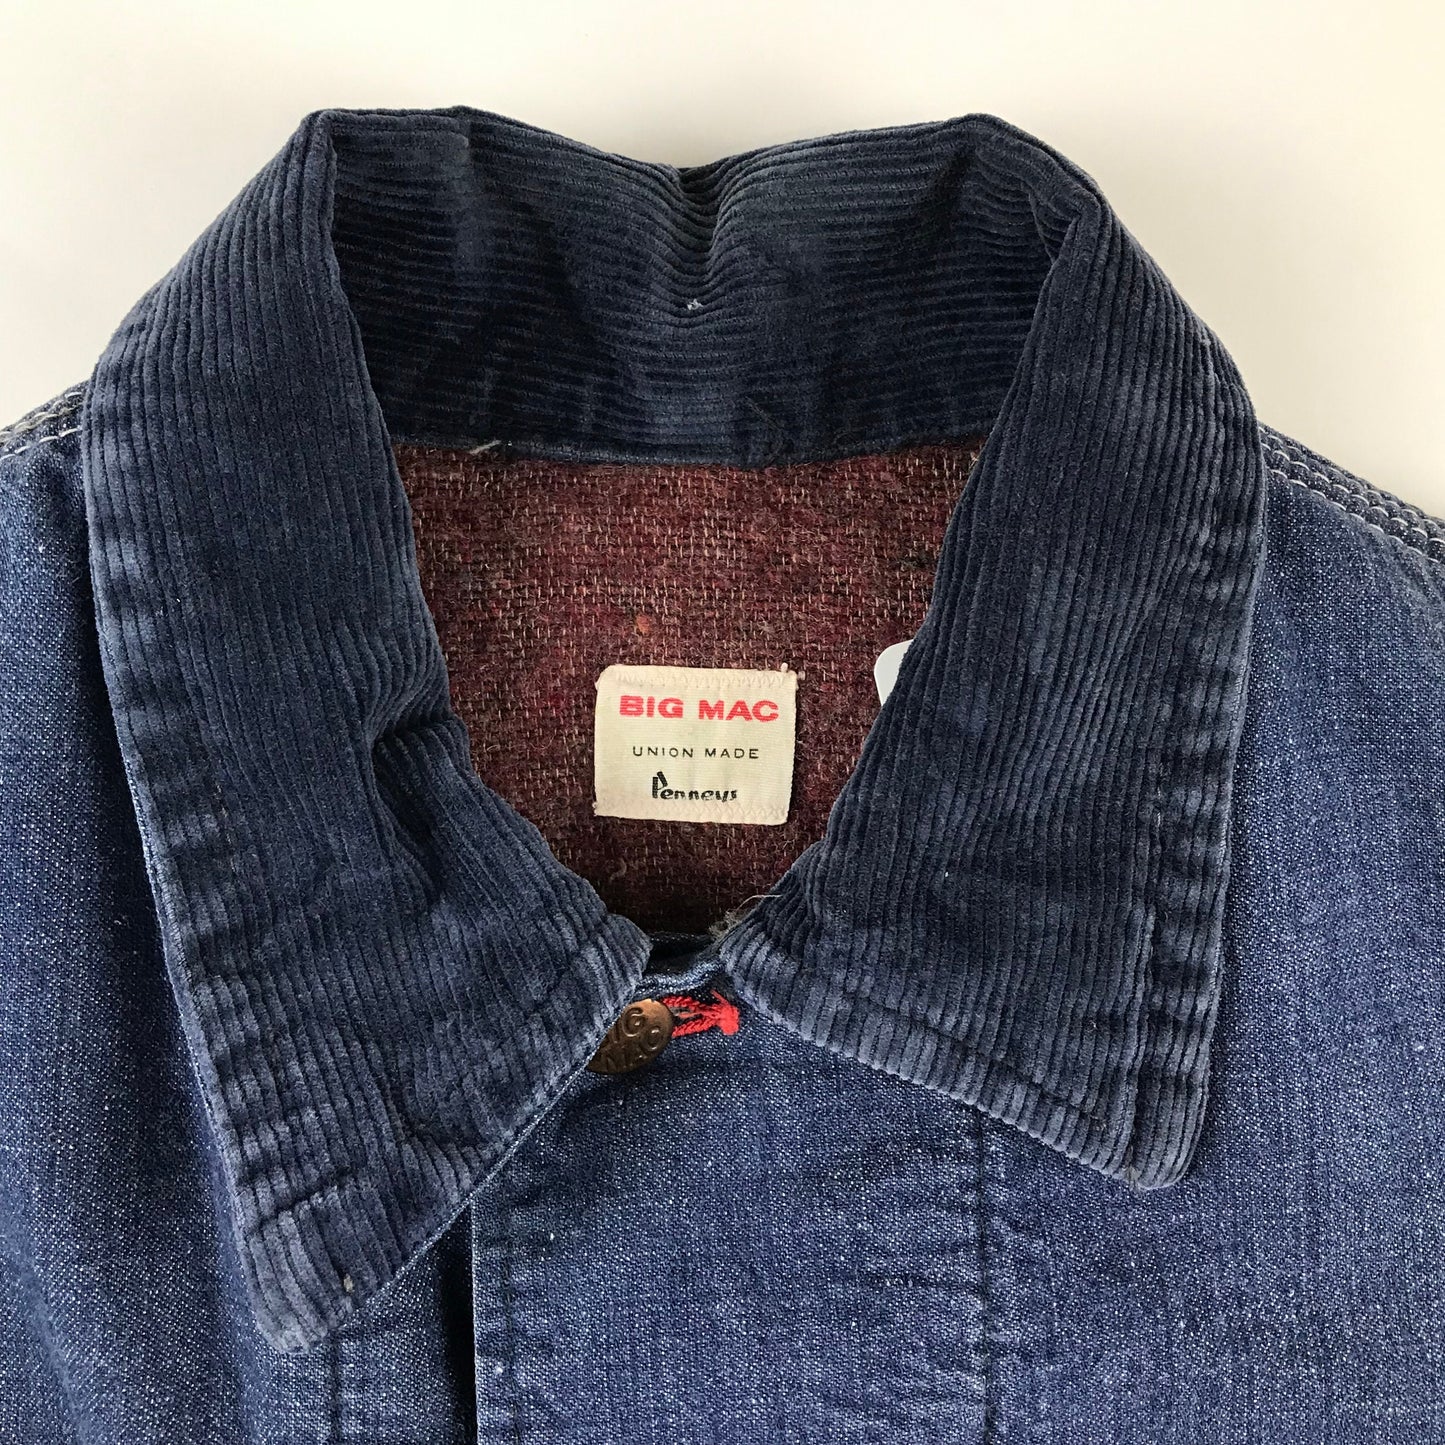 1960s Penneys Big Mac Blanket Lined Denim Chore Jacket Made in USA Size L